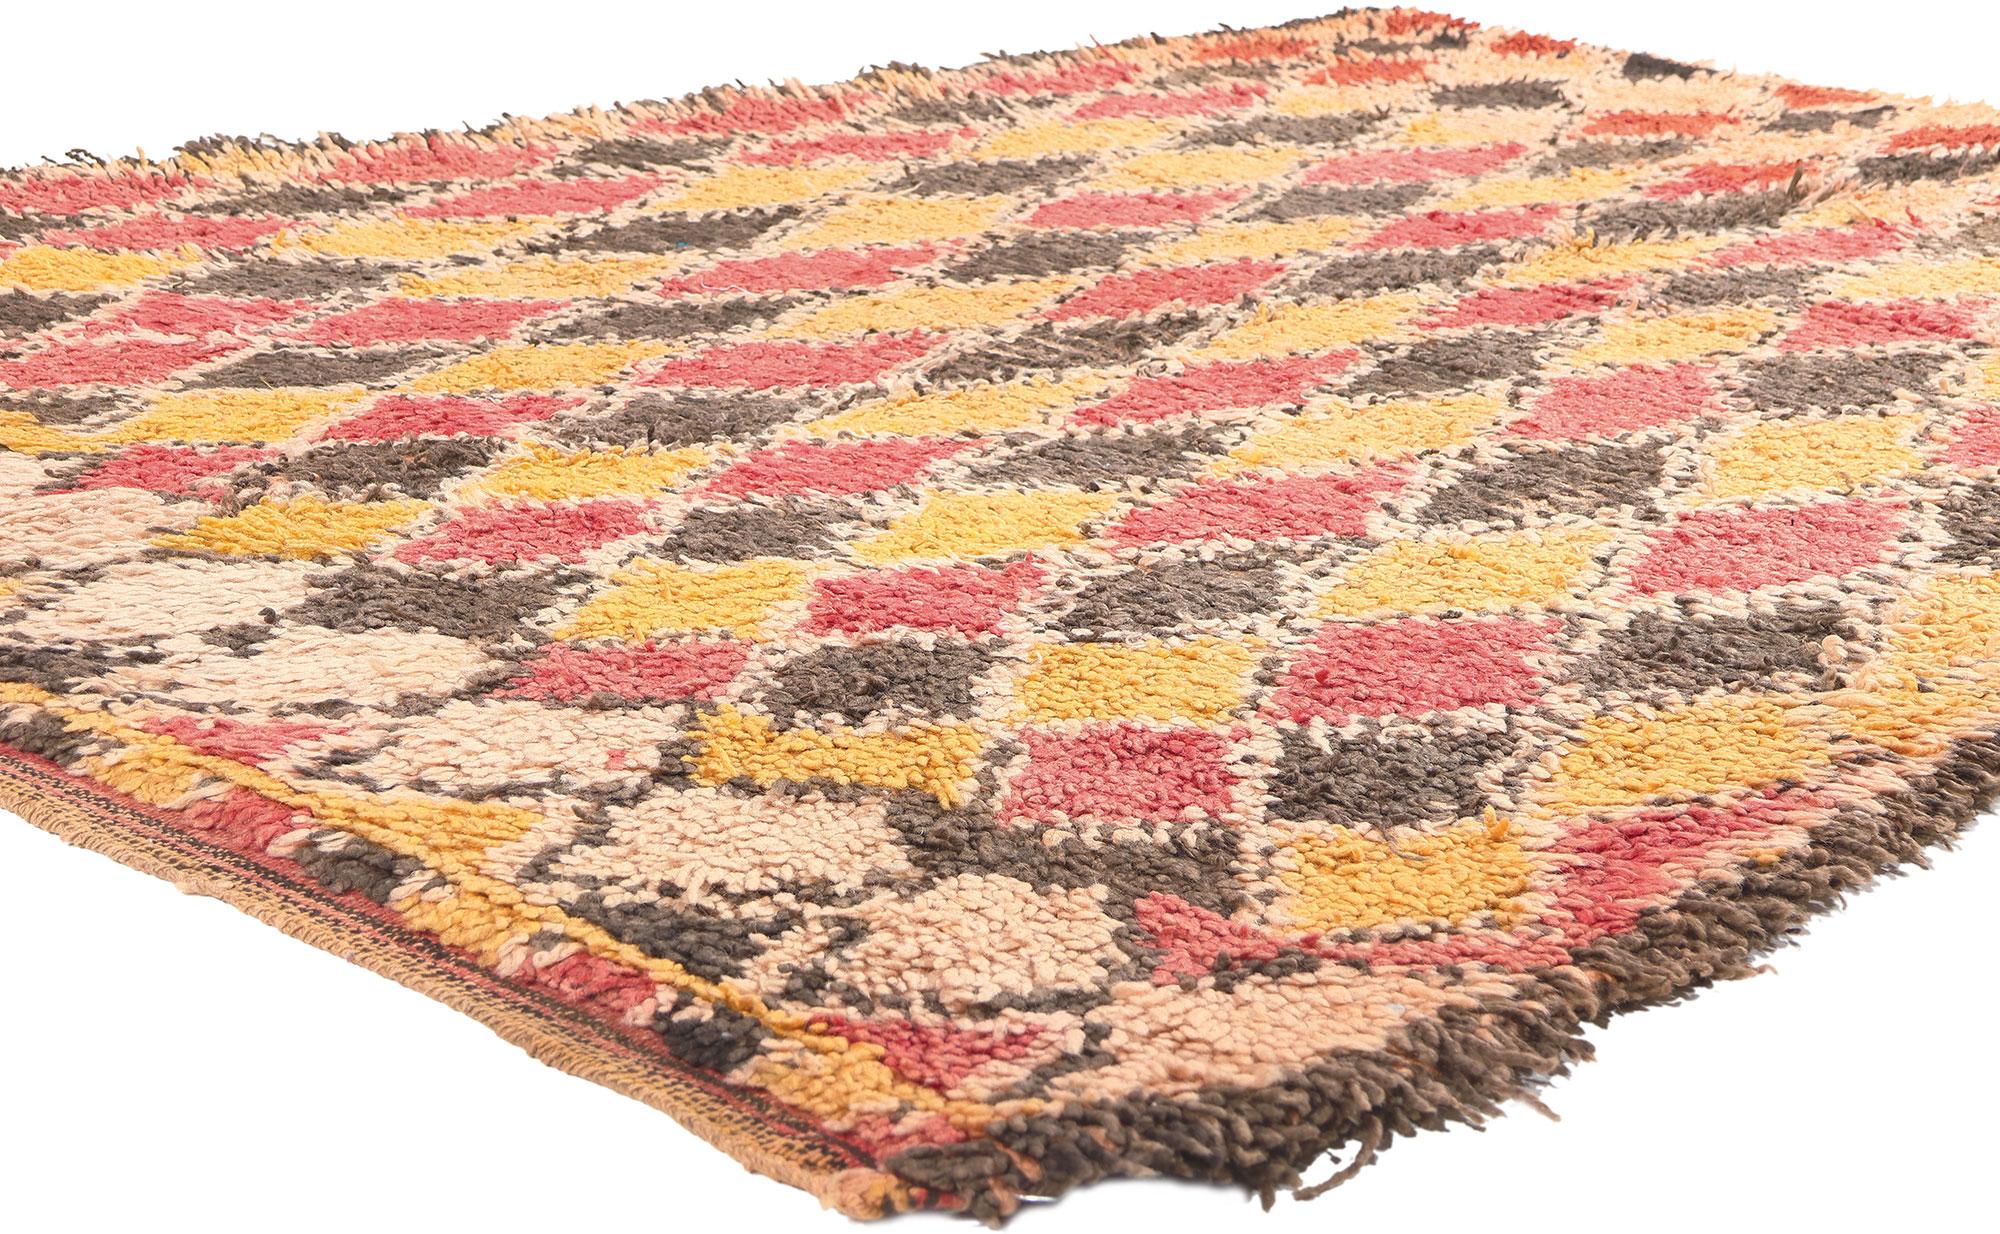 20443 Vintage Boujad Moroccan Rug, 05'04 x 07'00.
Explore the enchantment of Boujad rugs, originating from the lively city of Boujad in the Khouribga region—a once pivotal pilgrimage center and bustling trade hub for caravans traveling between Fes